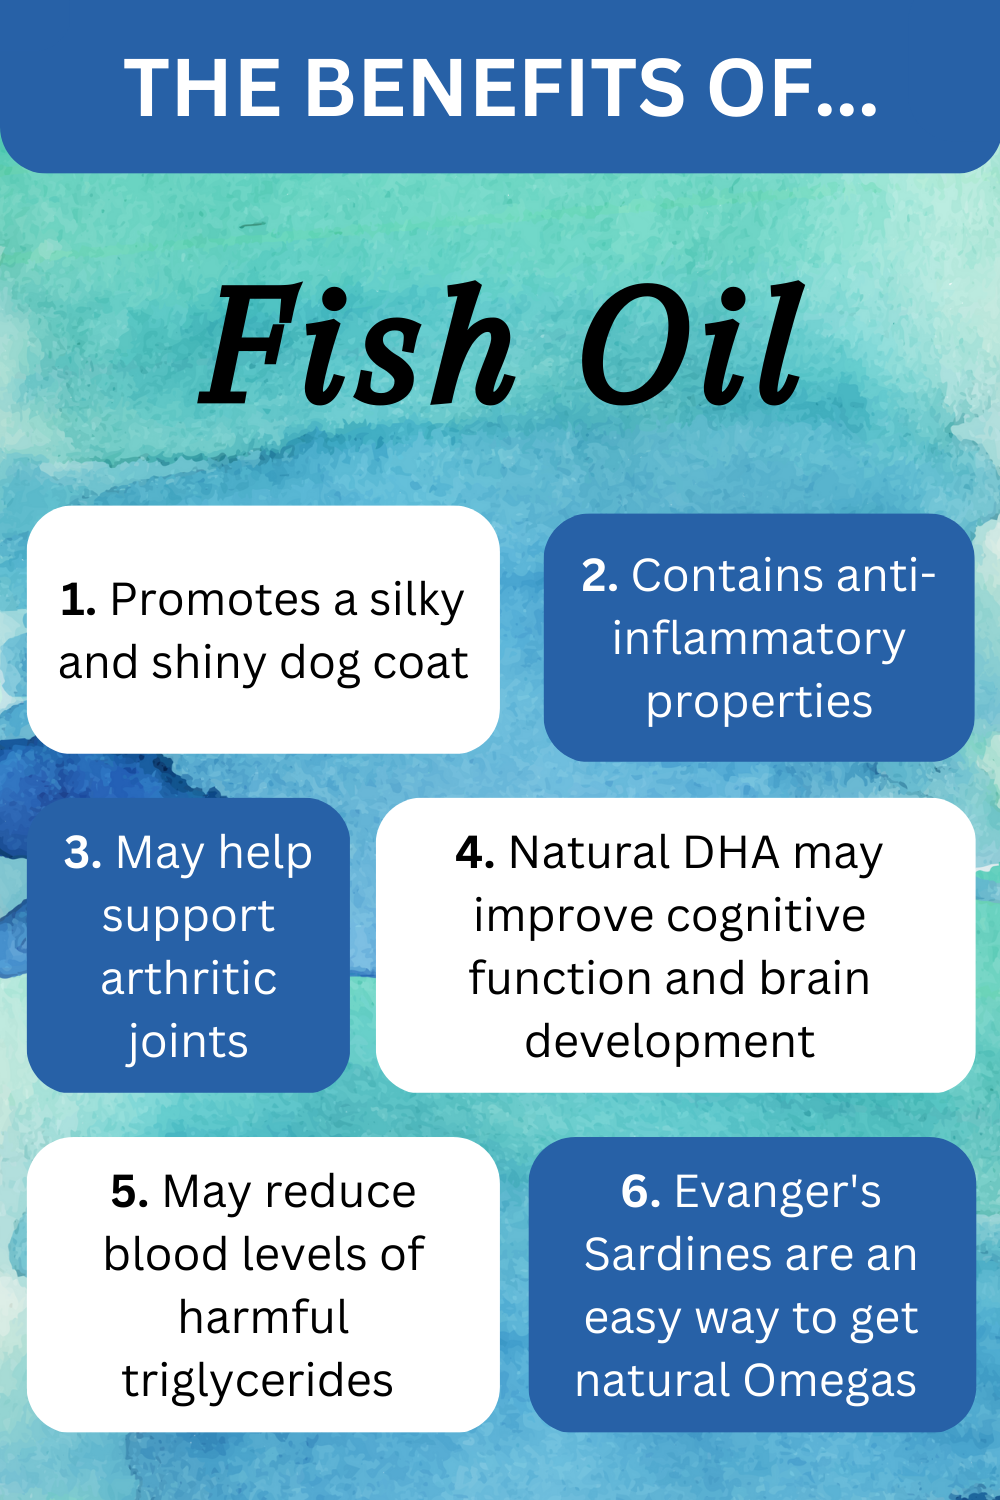 Evanger's Fish Friday: The Benefits of Fish Oil and Natural Omegas in Your Pet's Diet